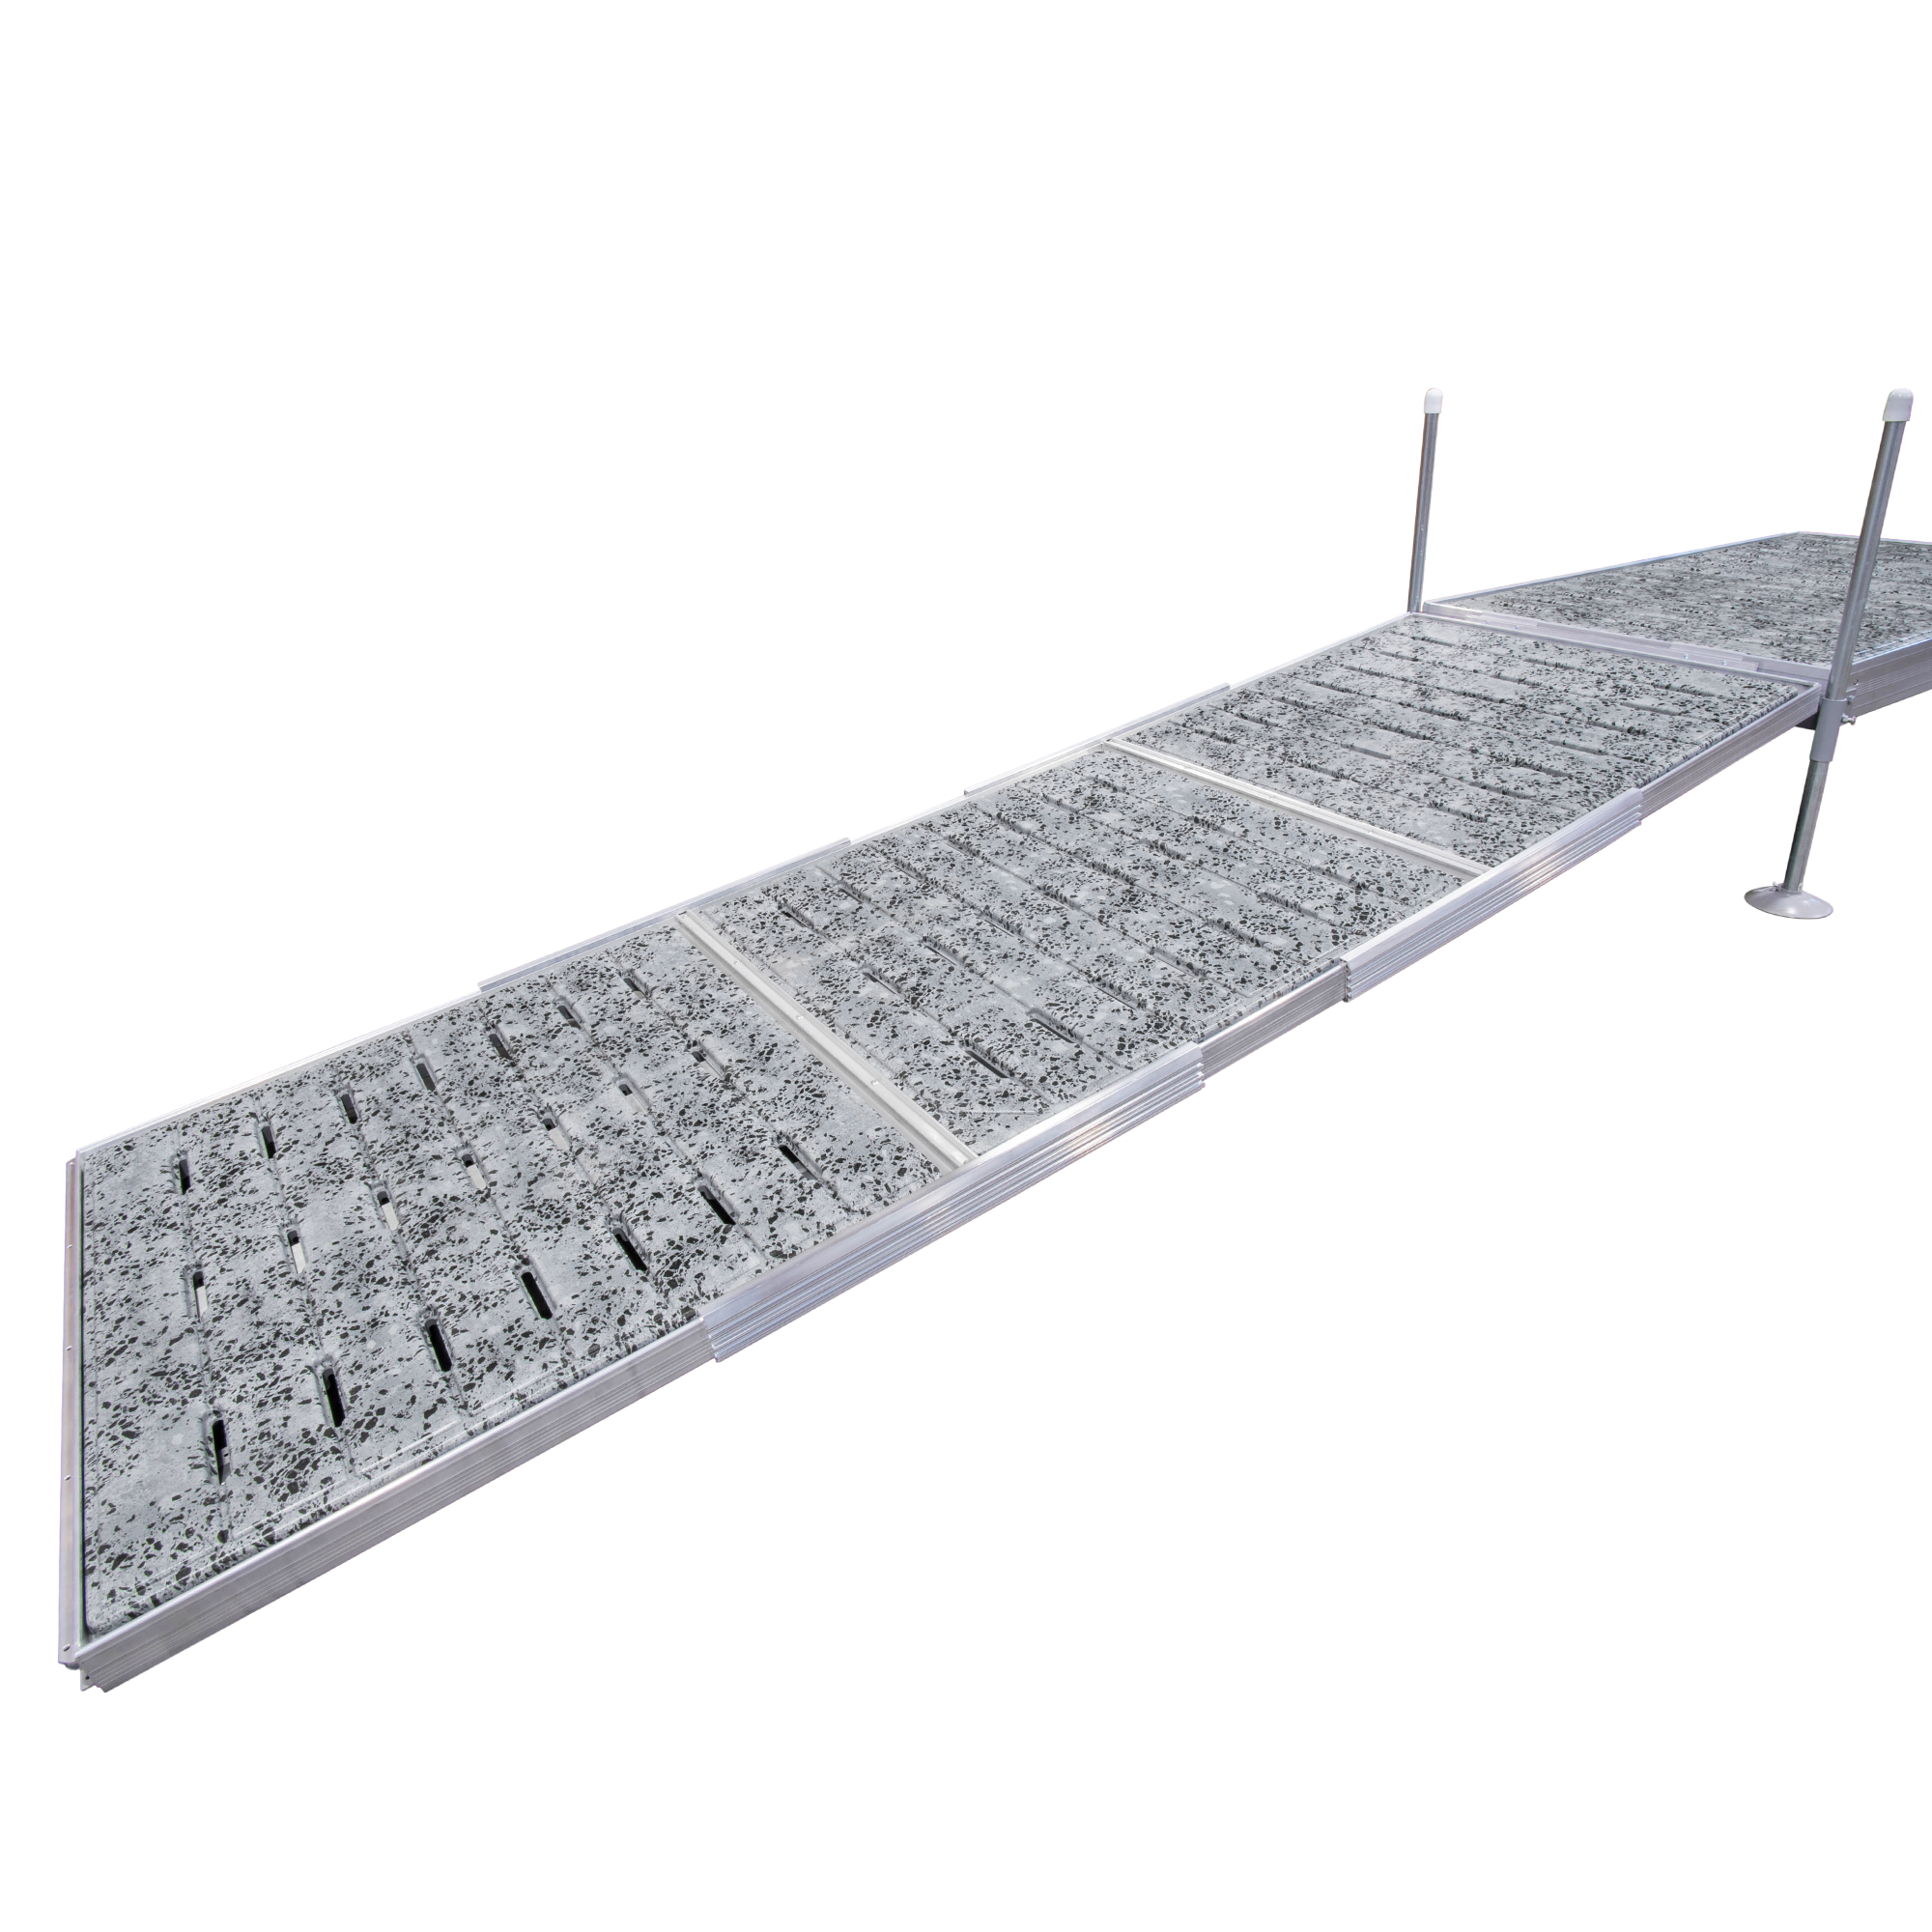 12' Modular Aluminum Gangway with Thermoformed Terrazzo Decking